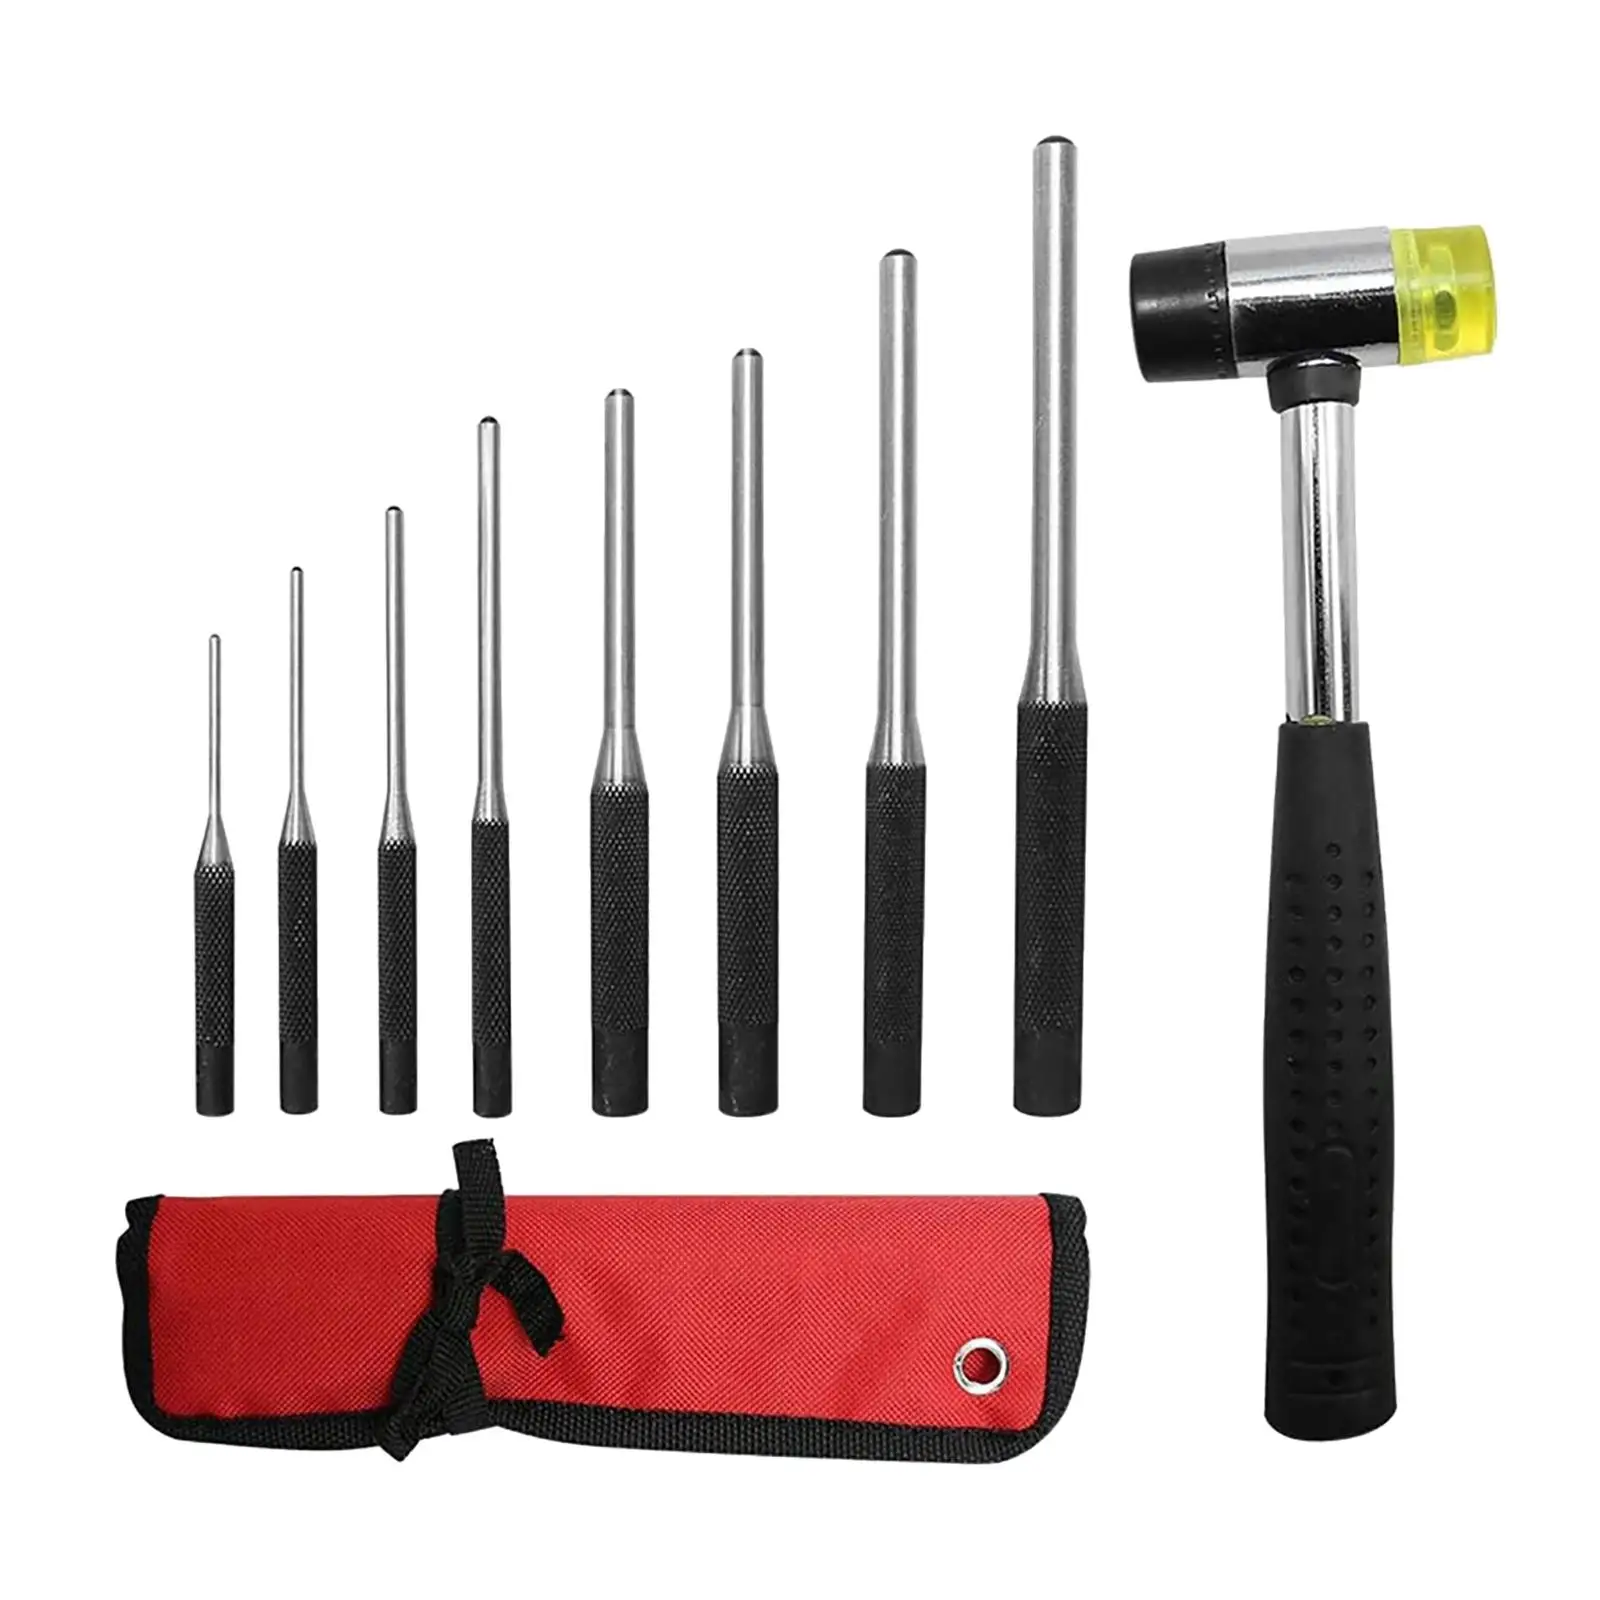 9 Pieces Heavy Duty Roll Pin Punch Set Double-Sided Hammer with Holder Gunsmith Maintenance Kit for Jewelry Jewelers Automotive